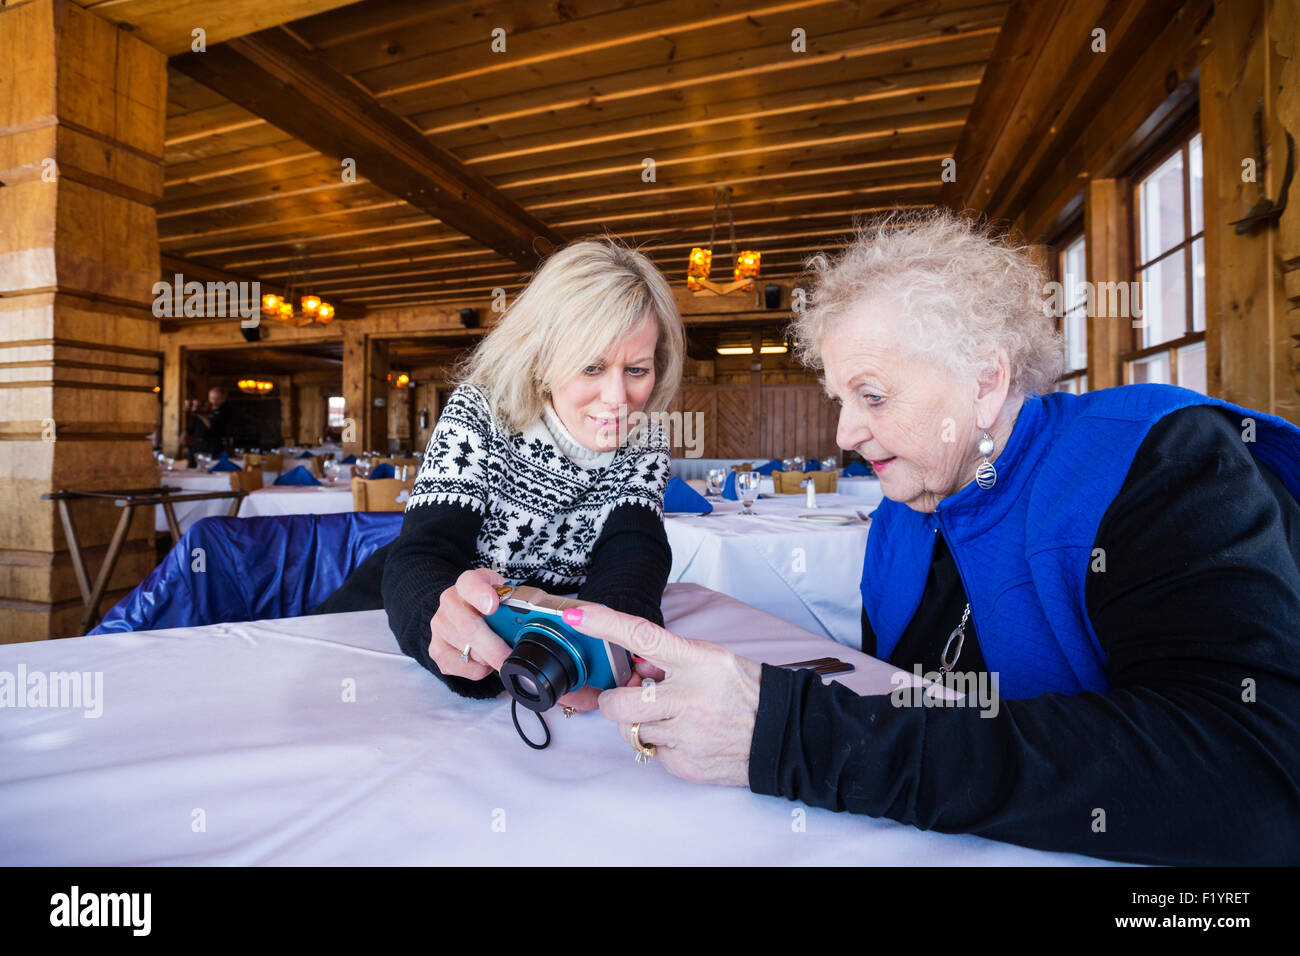 Senior mother and adult daughter look at back of digital camera while waiting for lunch inside a log dining room, Lutsen, MN Stock Photo